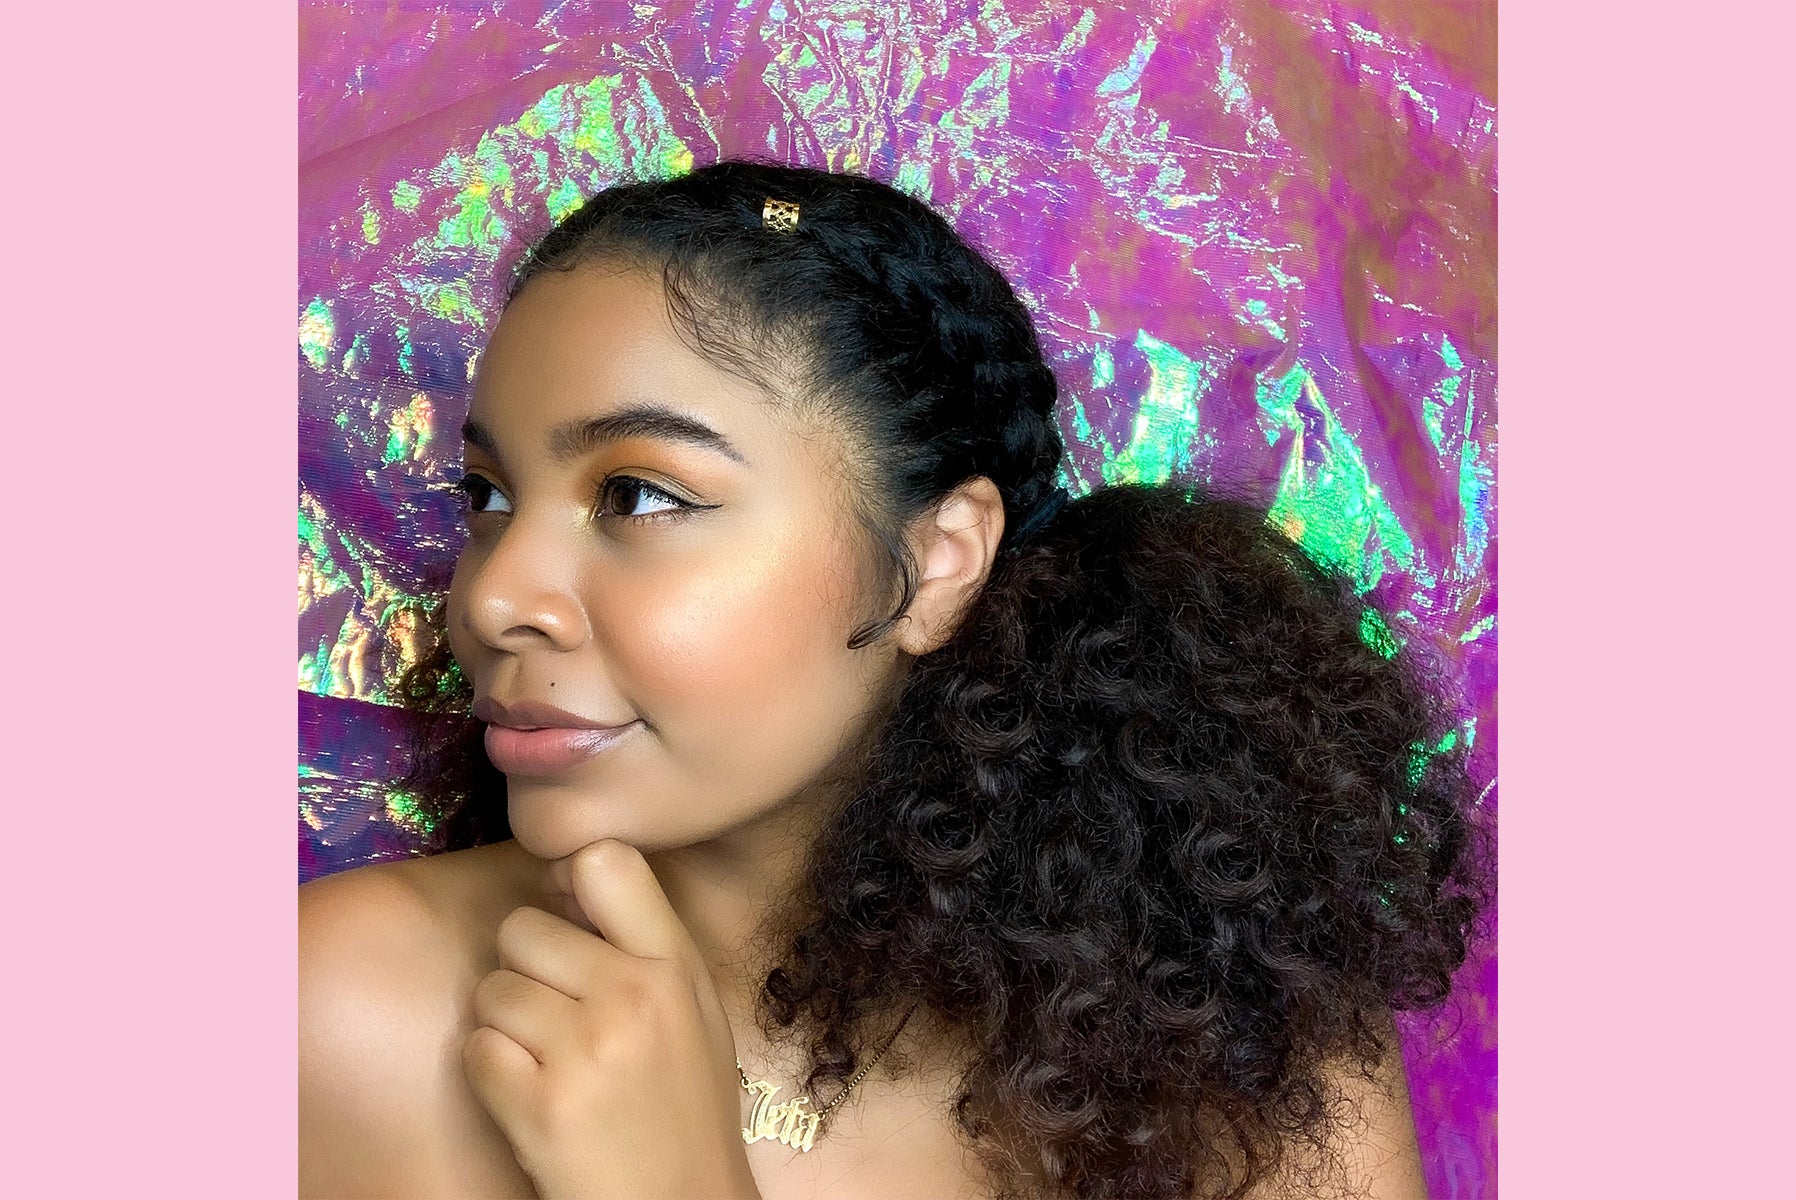 Half-Up Style for Curly Hair - Babes In Hairland